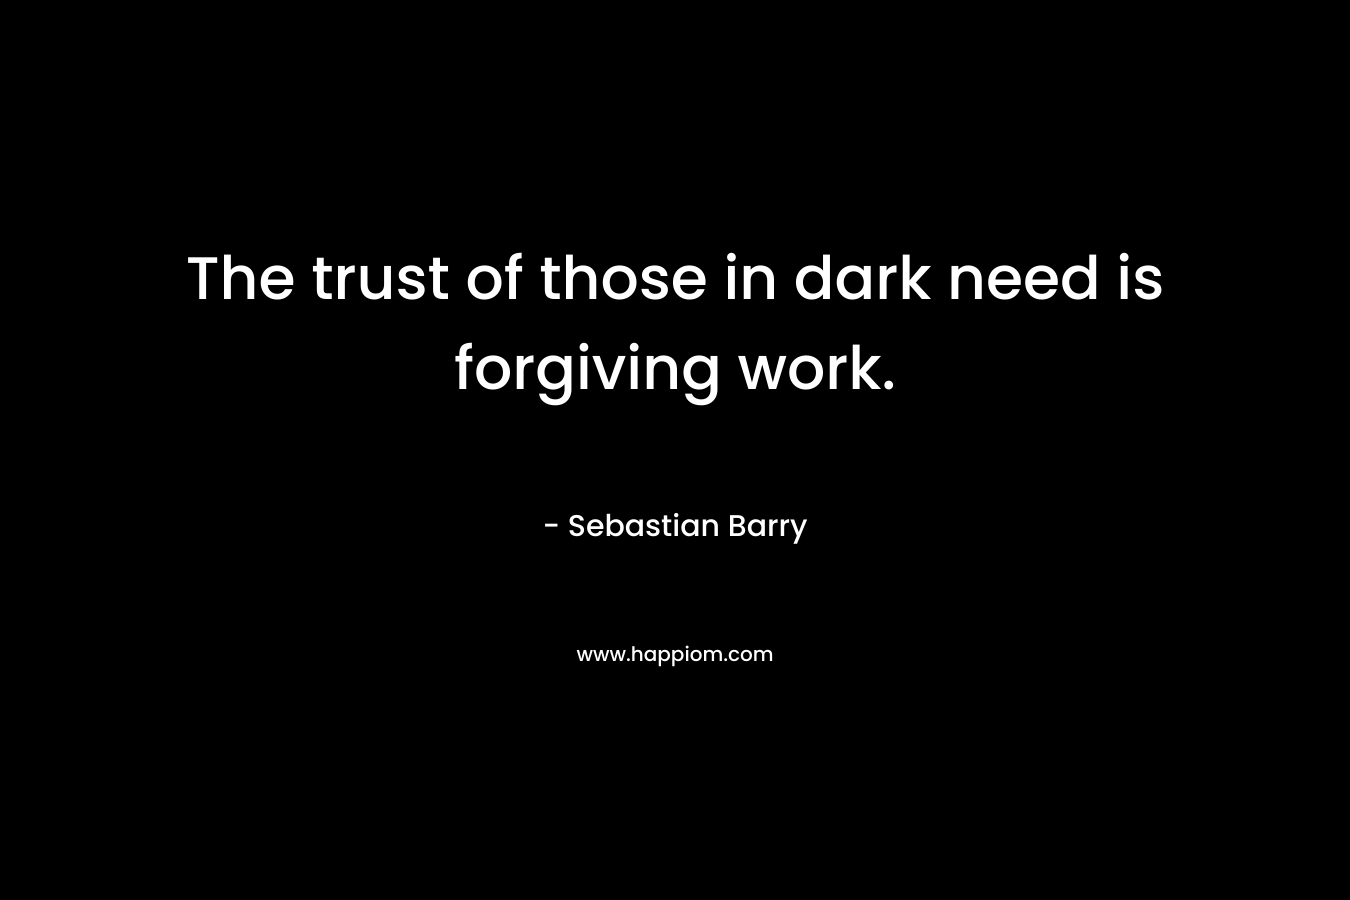 The trust of those in dark need is forgiving work. – Sebastian Barry